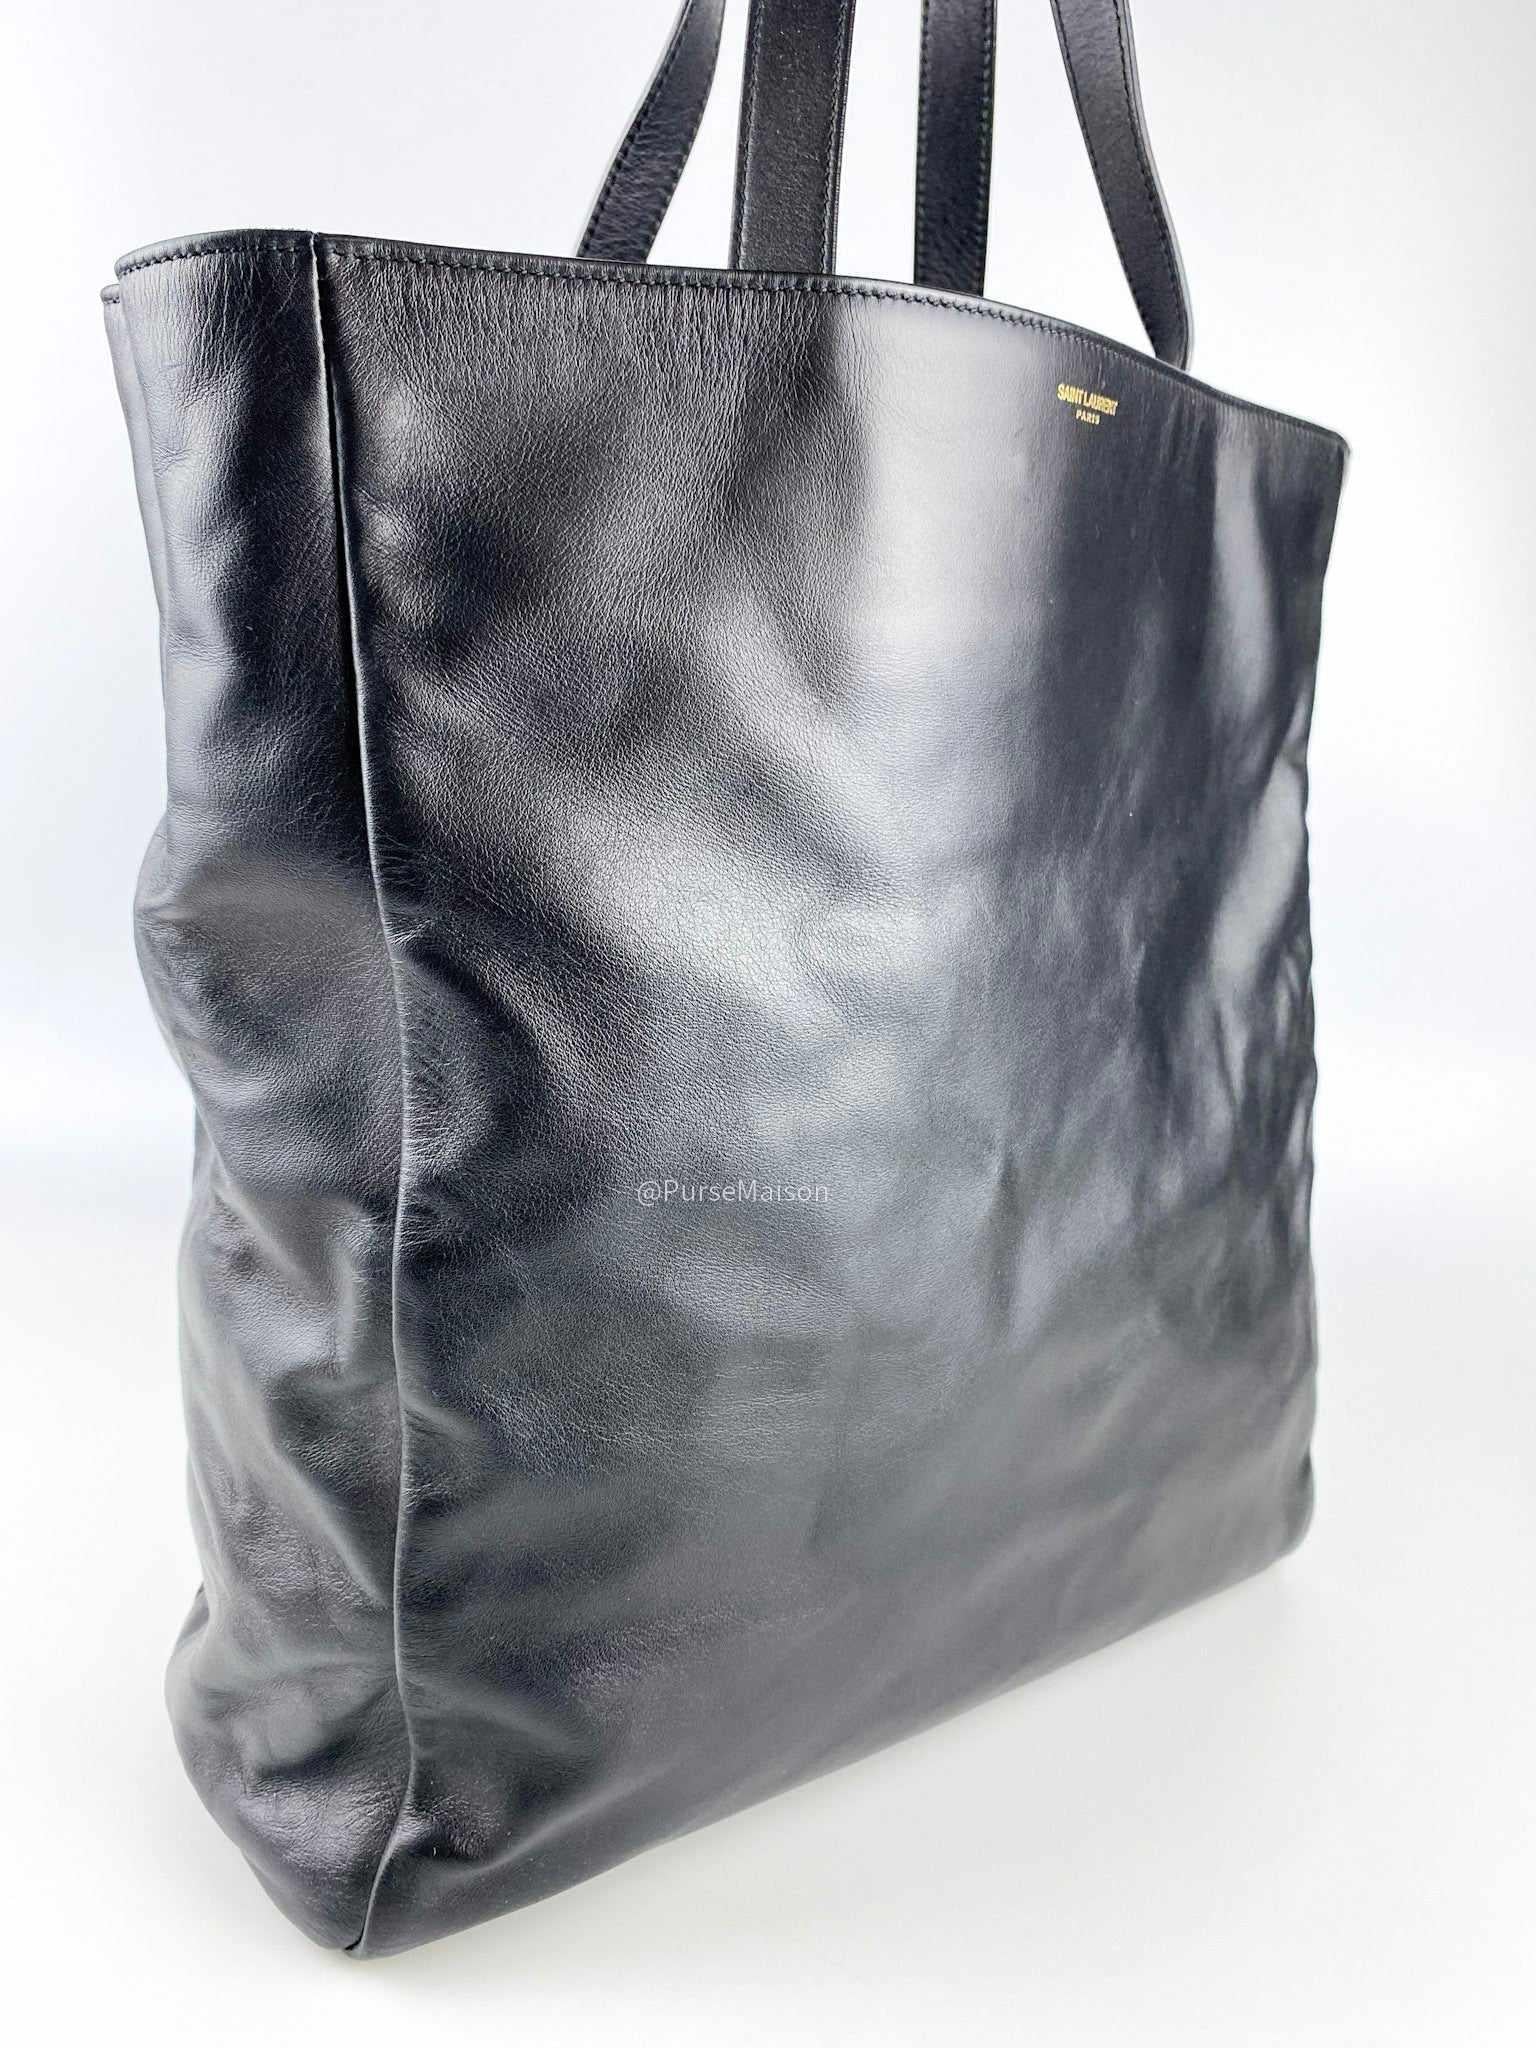 Yves Saint Laurent Cabas Reversible Leather Suede Shopping Tote Bag